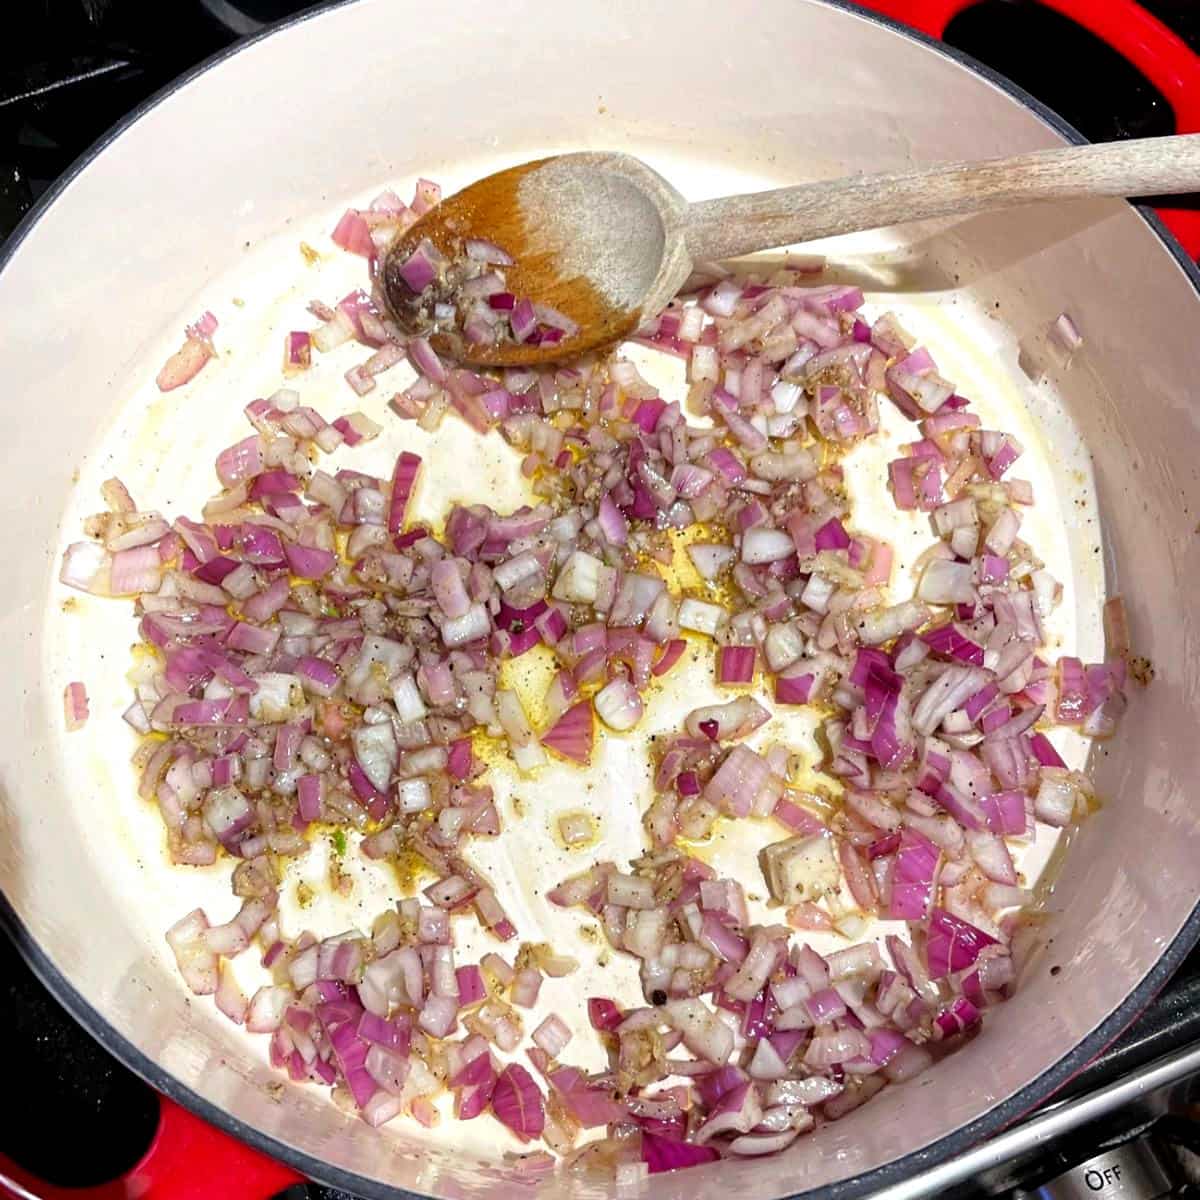 Oregano and pepper added to onions in skillet.